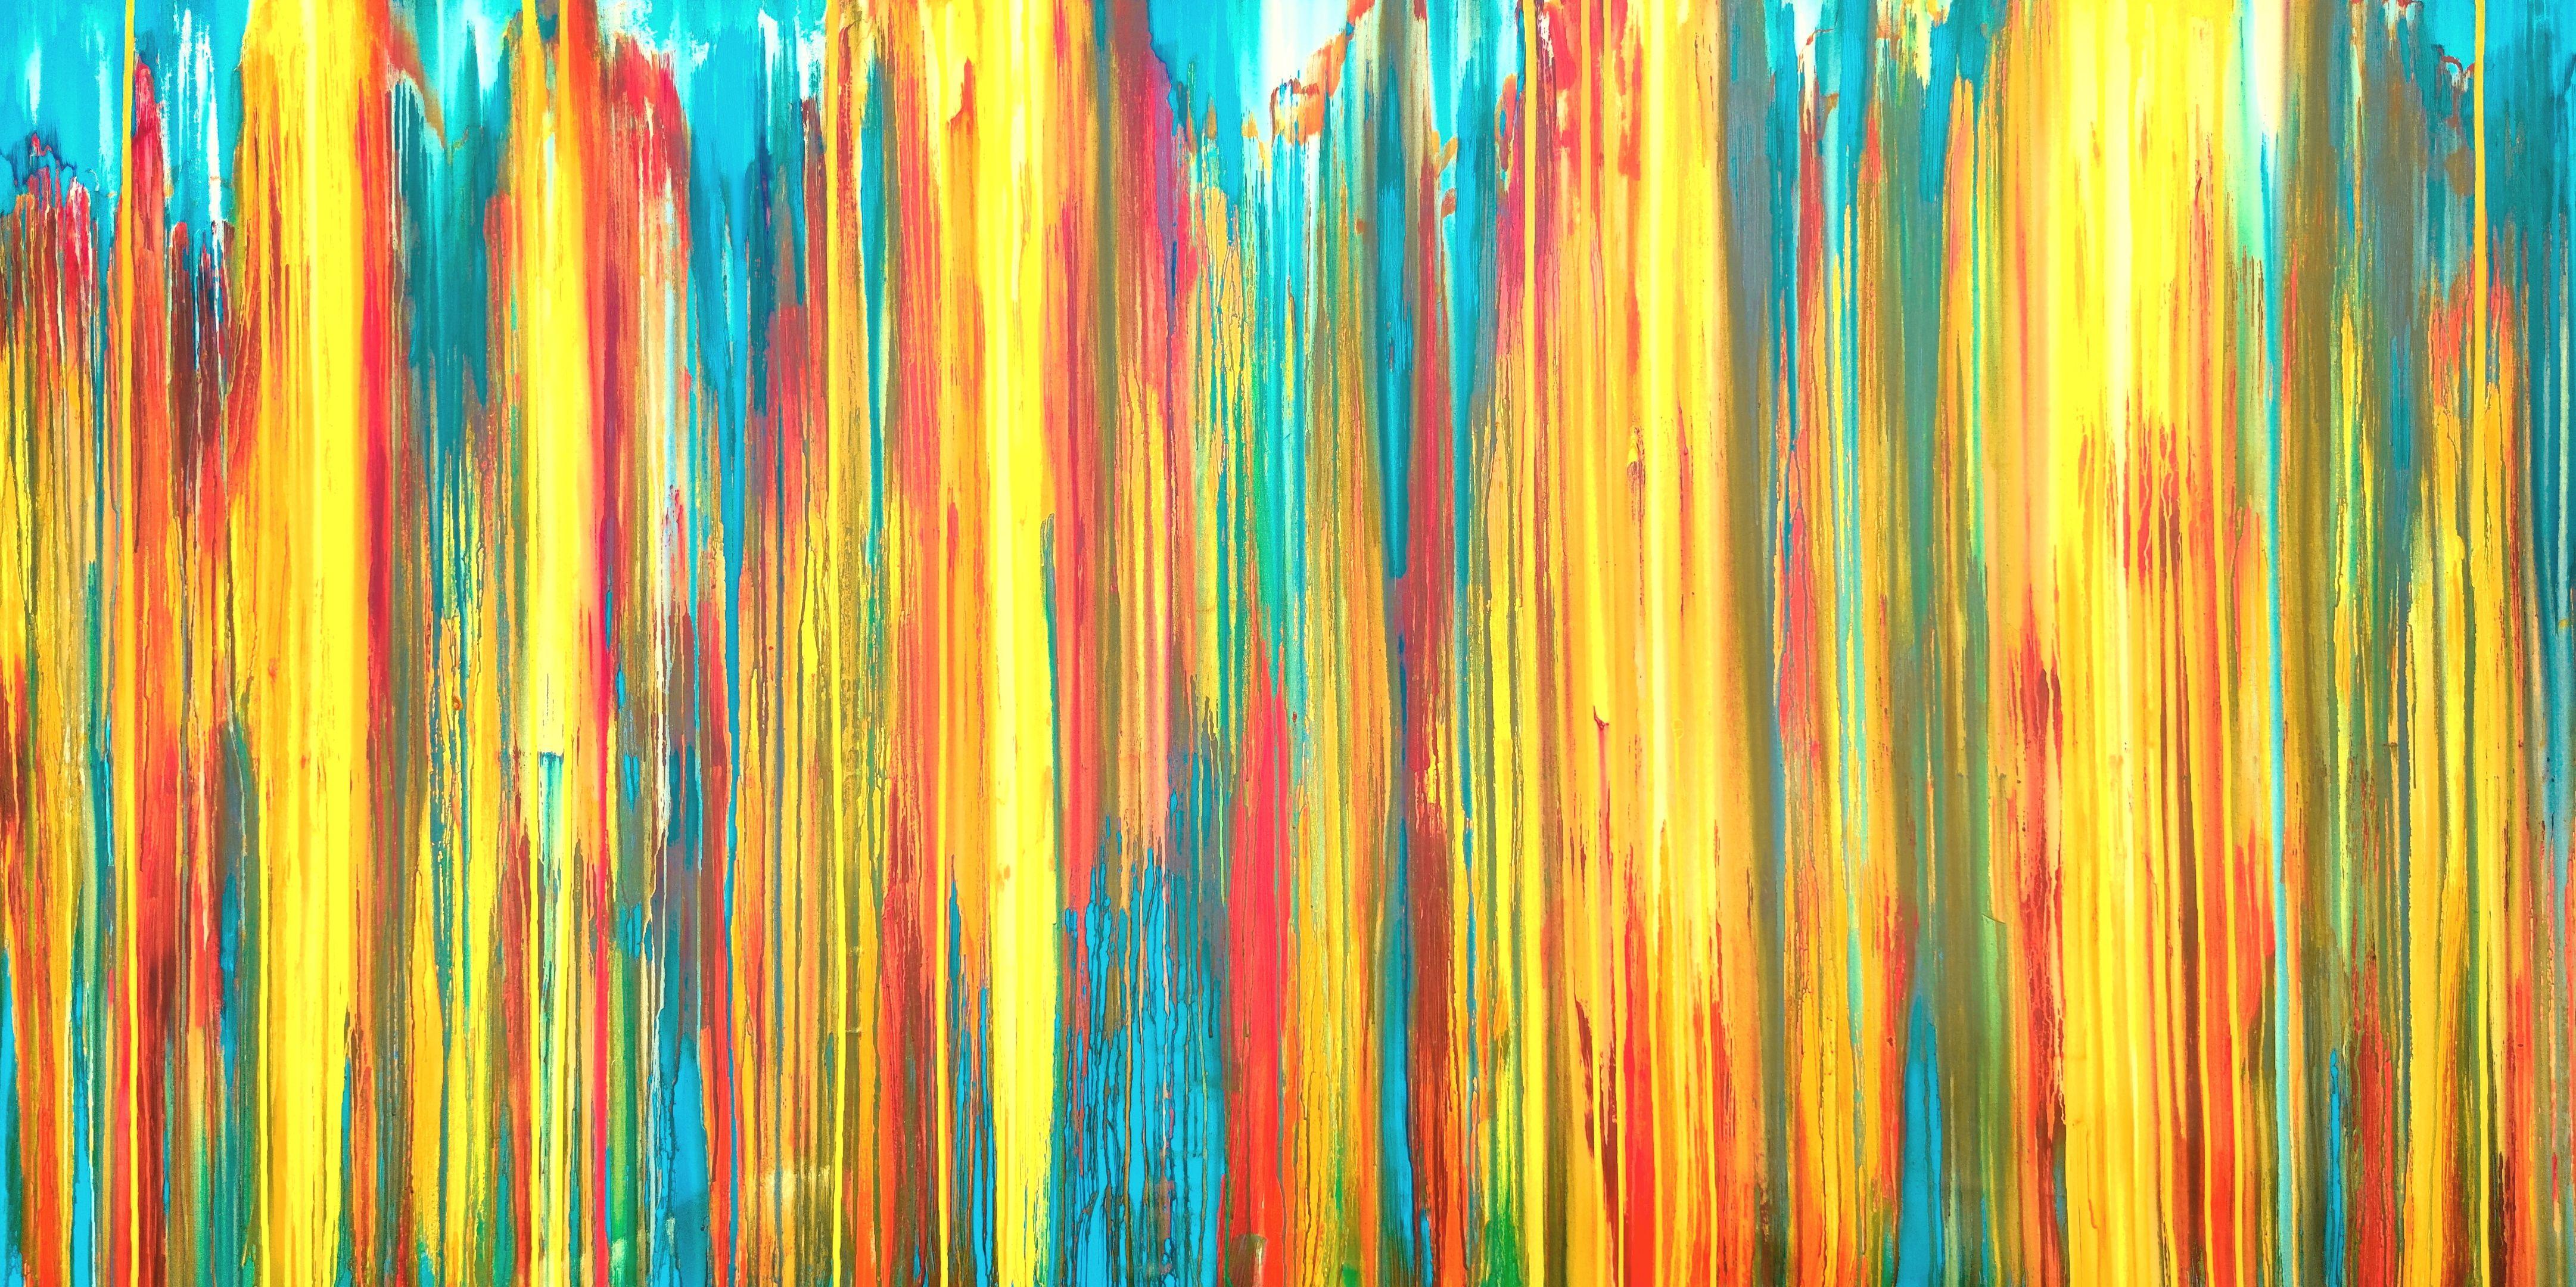 Carla Sá Fernandes Abstract Painting - The Emotional Creation #323, Painting, Acrylic on Canvas